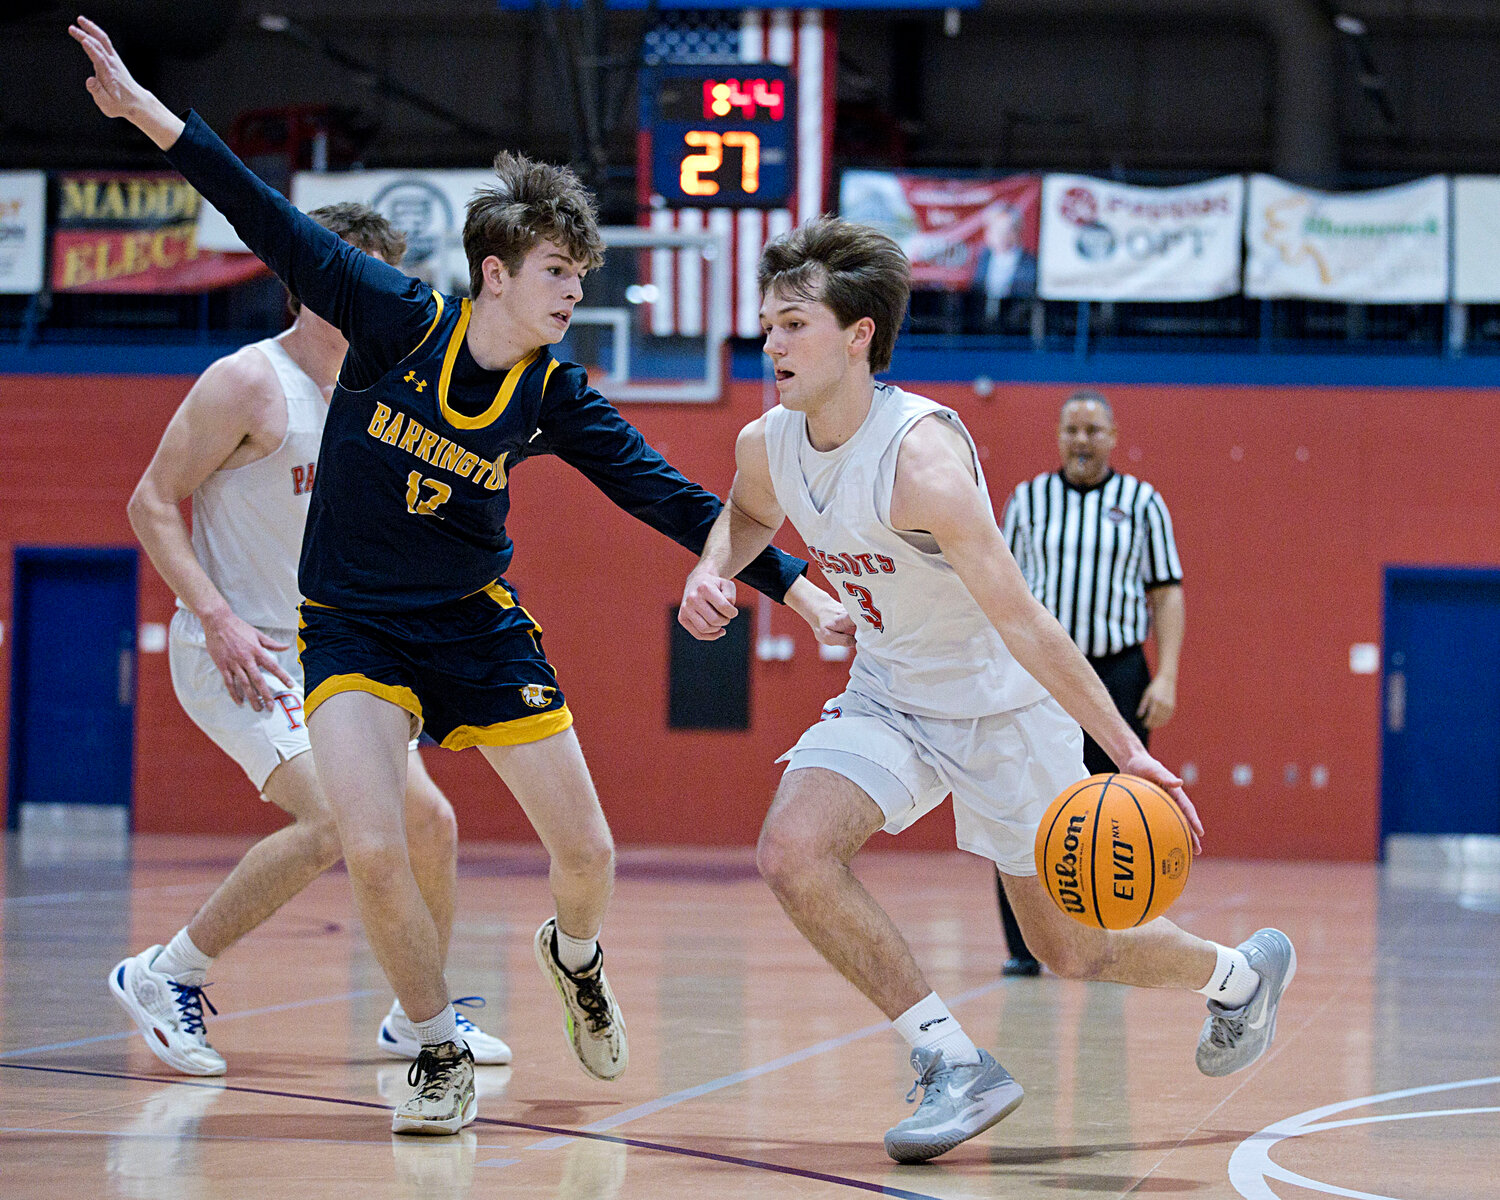 Colin McDermott guards Portsmouth's Adam Conheeny while playing defense for the Eagles.